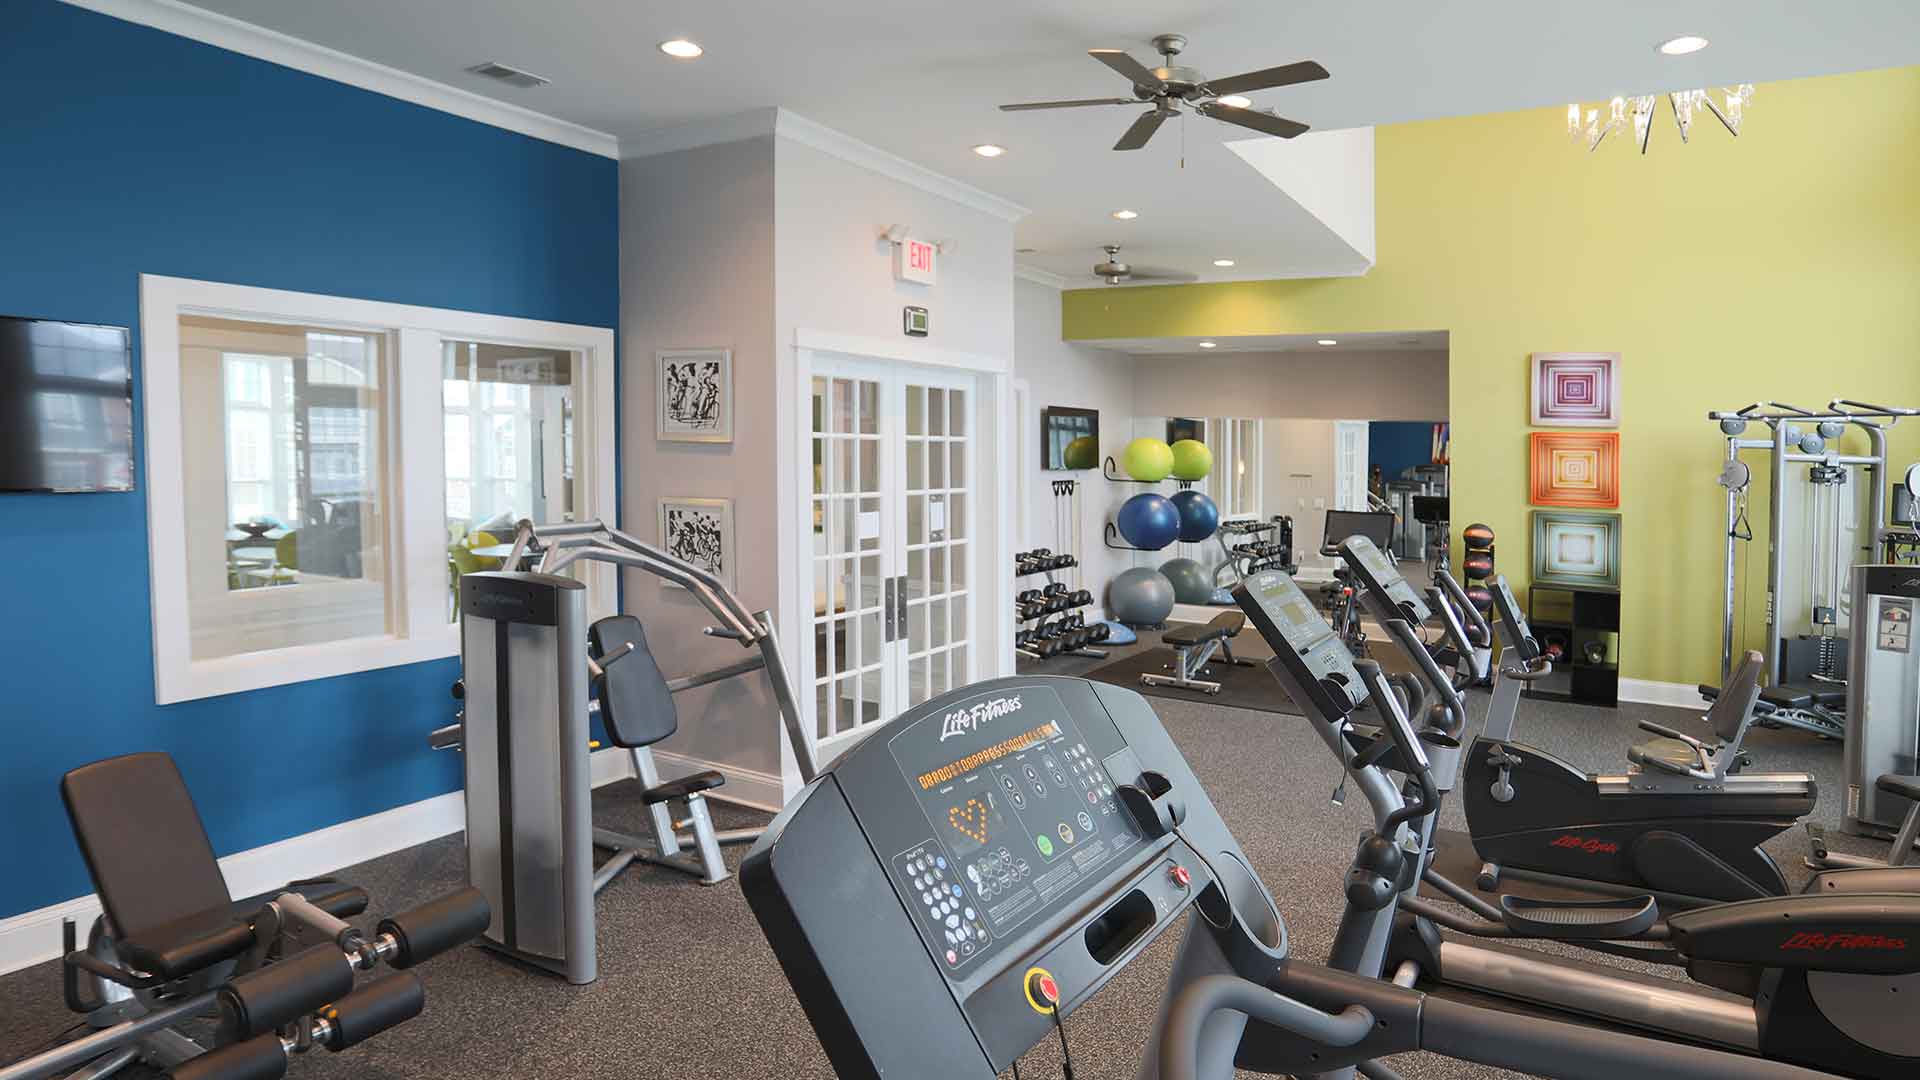 Spacious fitness center with exercise machines and free-weights.